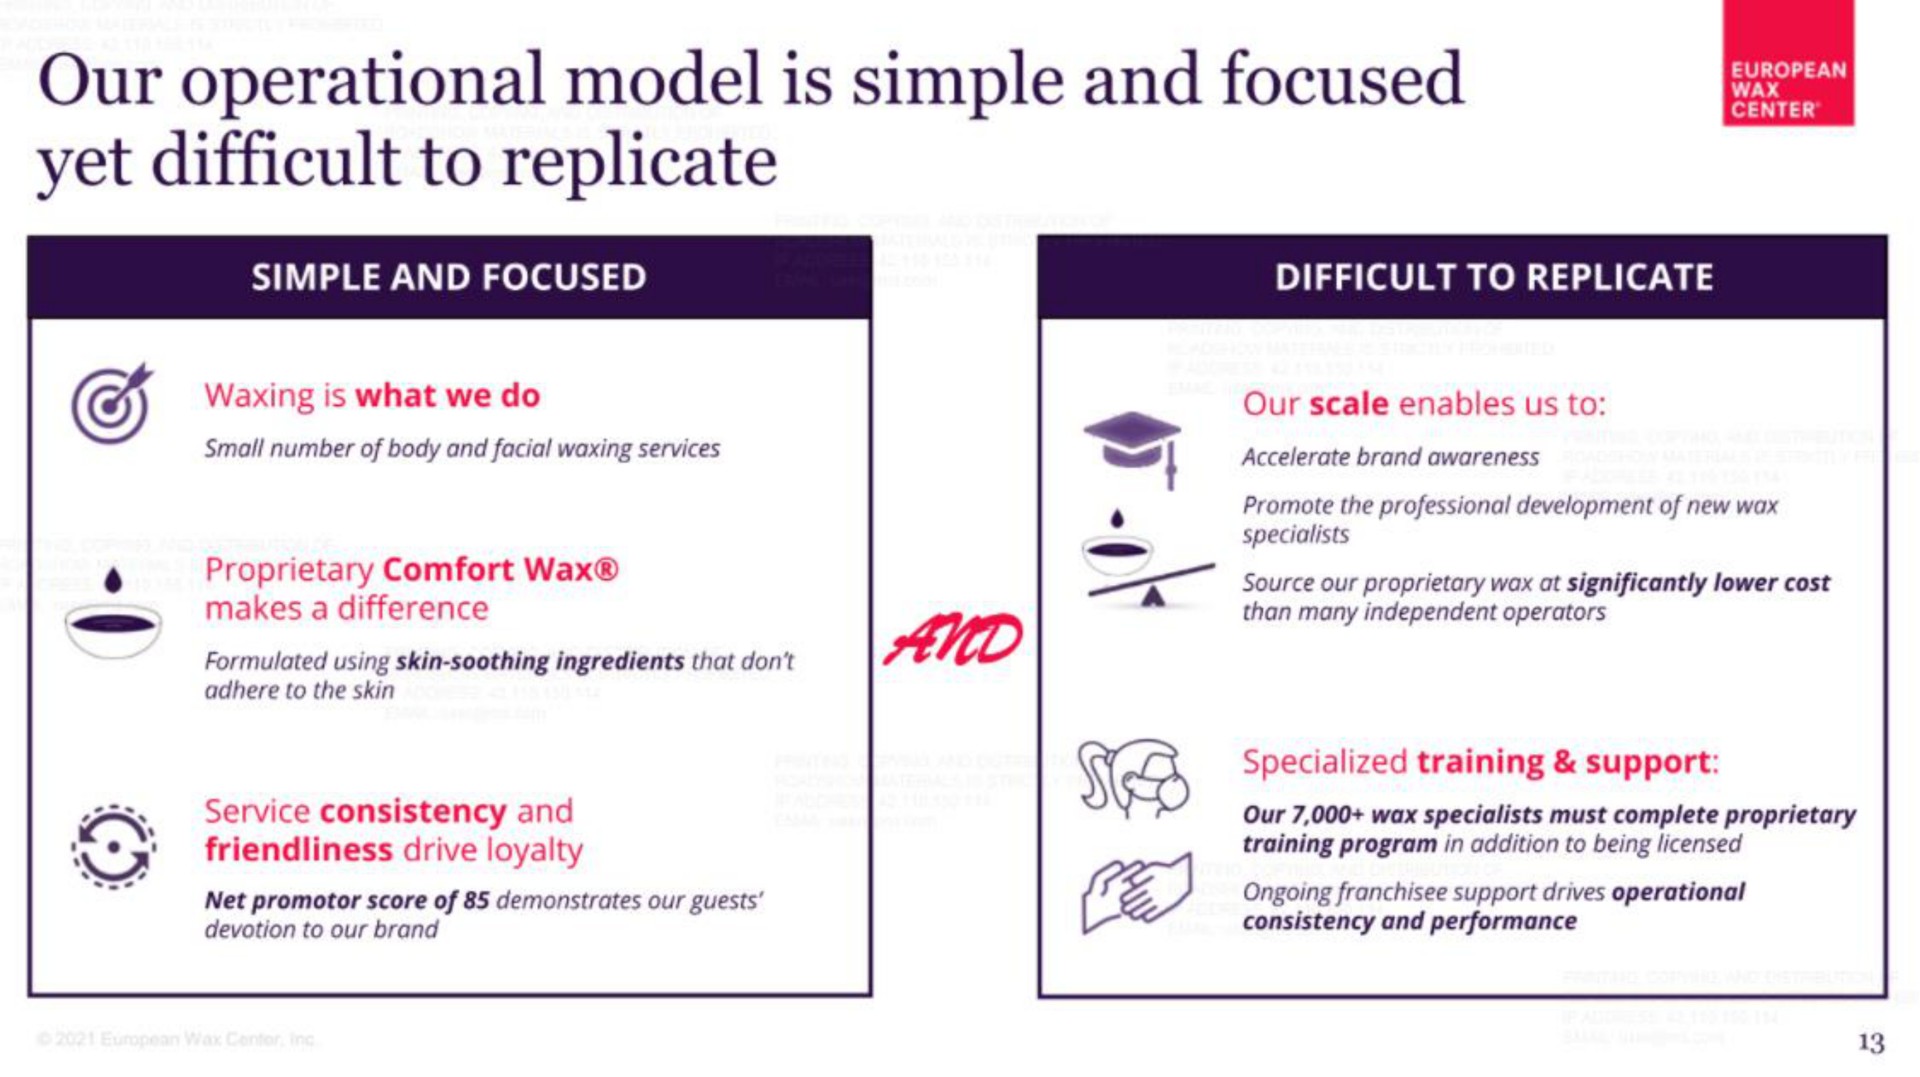 our operational model is simple and focused yet difficult to replicate eta | European Wax Center